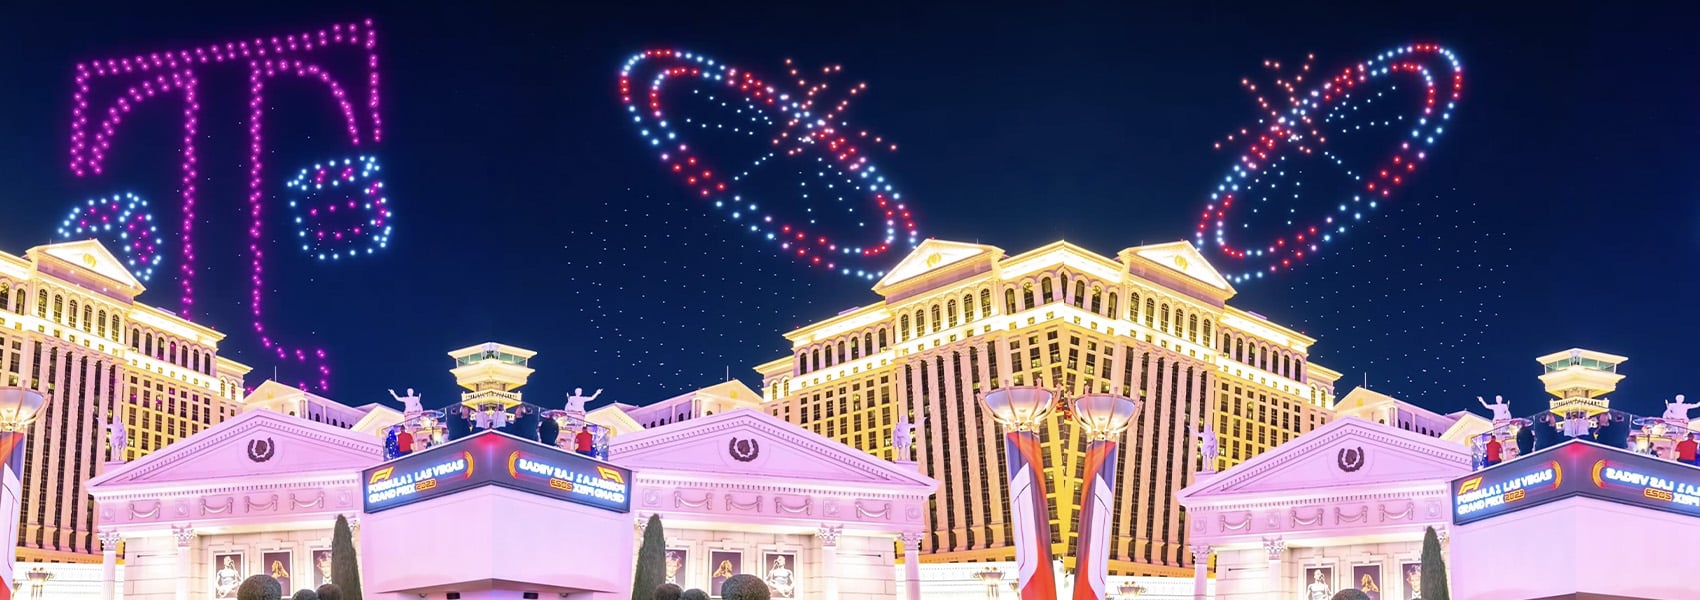 Drone stories - We lit up the skies during the Formula 1 Las Vegas drone show